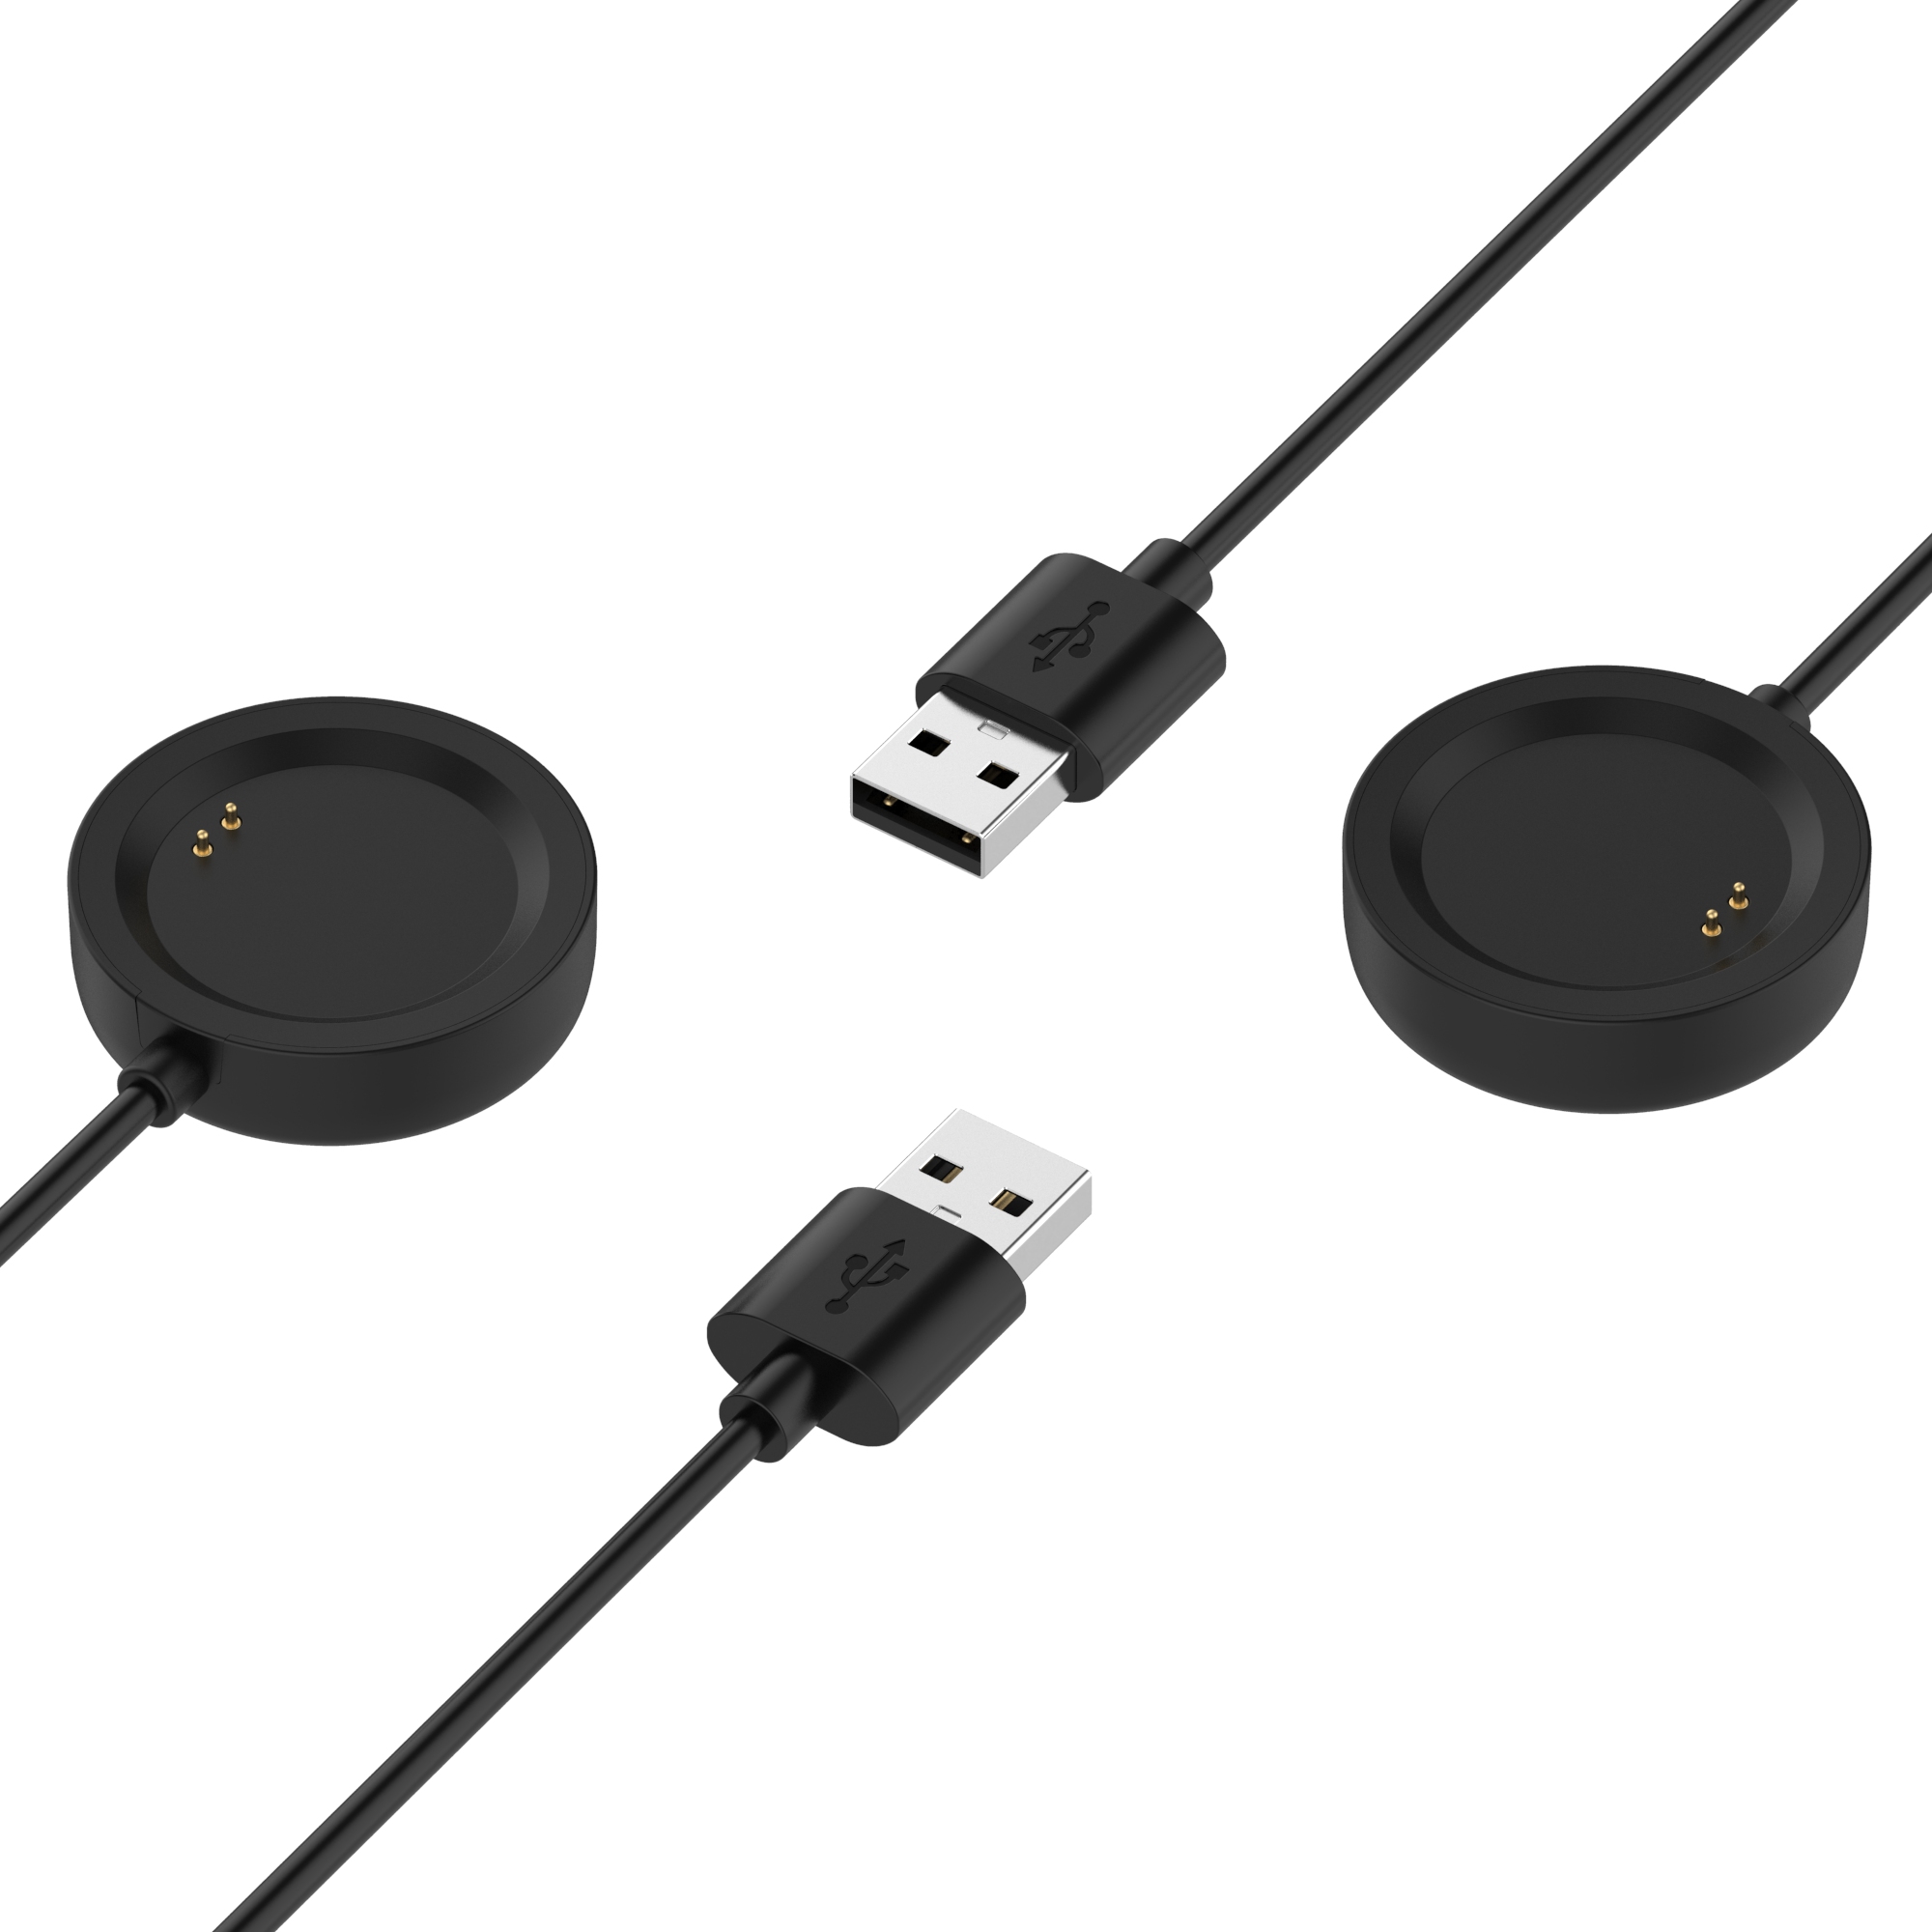 Bakeey-1m-Watch-Cable-Charging-Cable-for-Oneplus-Watch-1862266-6